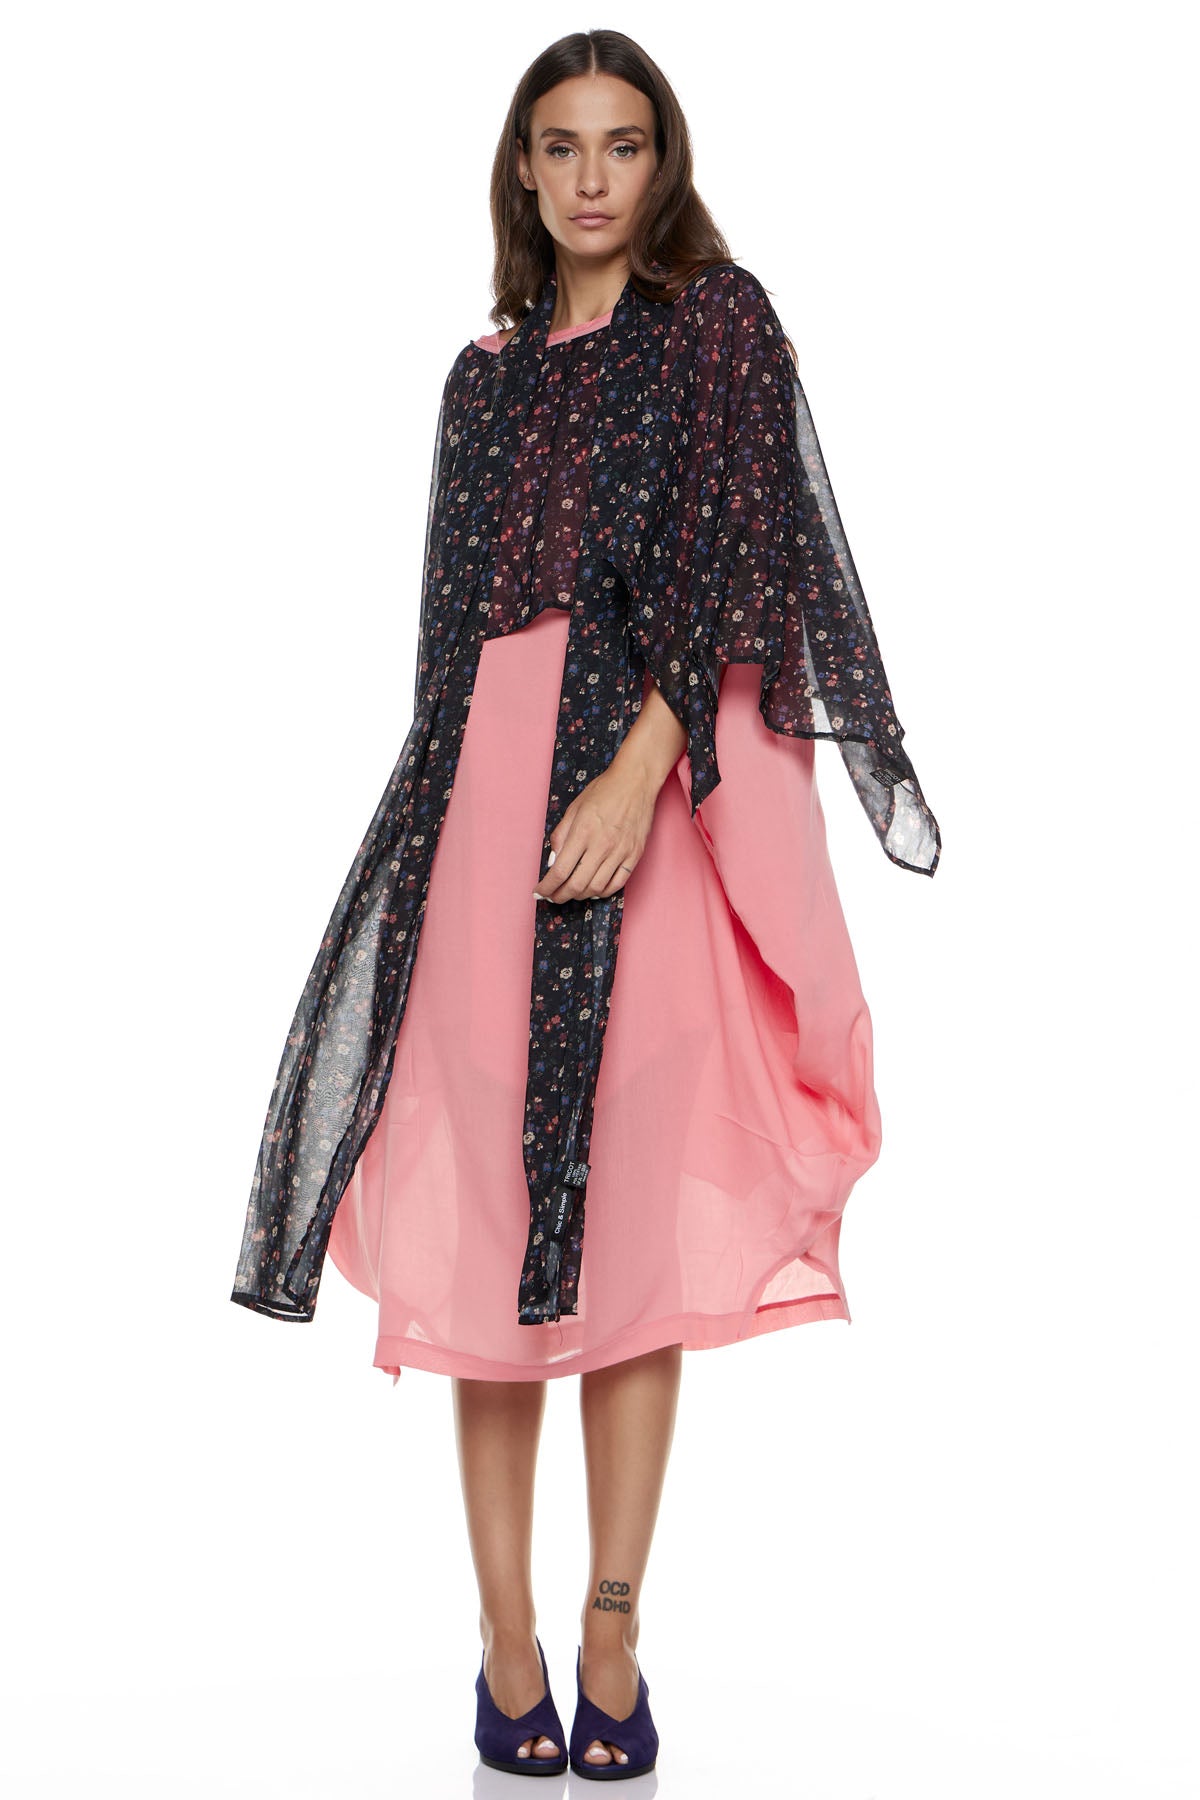 Combination of Circle Dress & Short Lolita Scarf - light coral with Floral Transparency